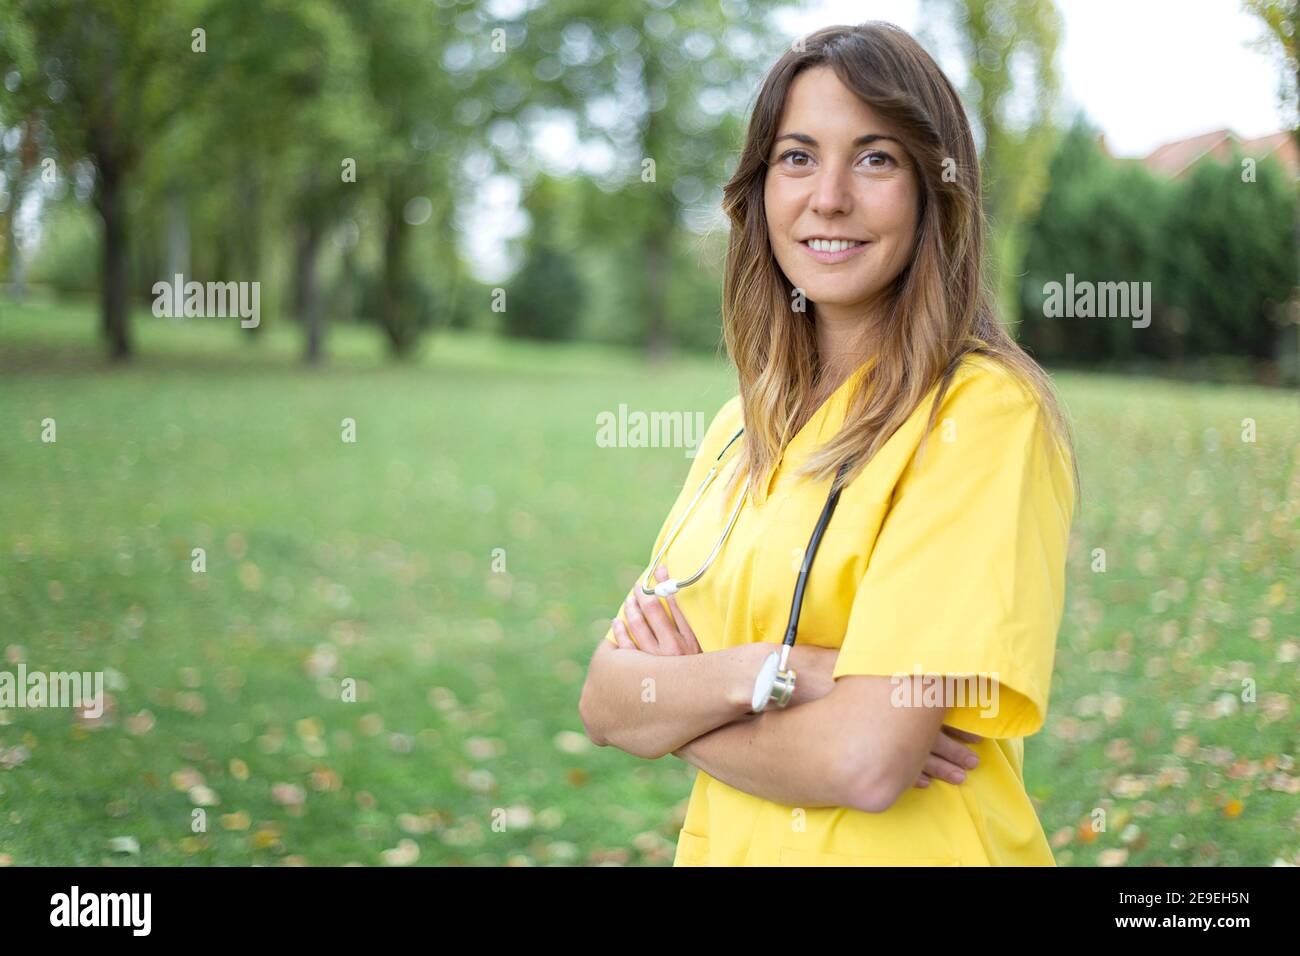 Portrait of caucasian female nurse with her arms crossed in confident pose. She is outdoors. Space for text. Stock Photo